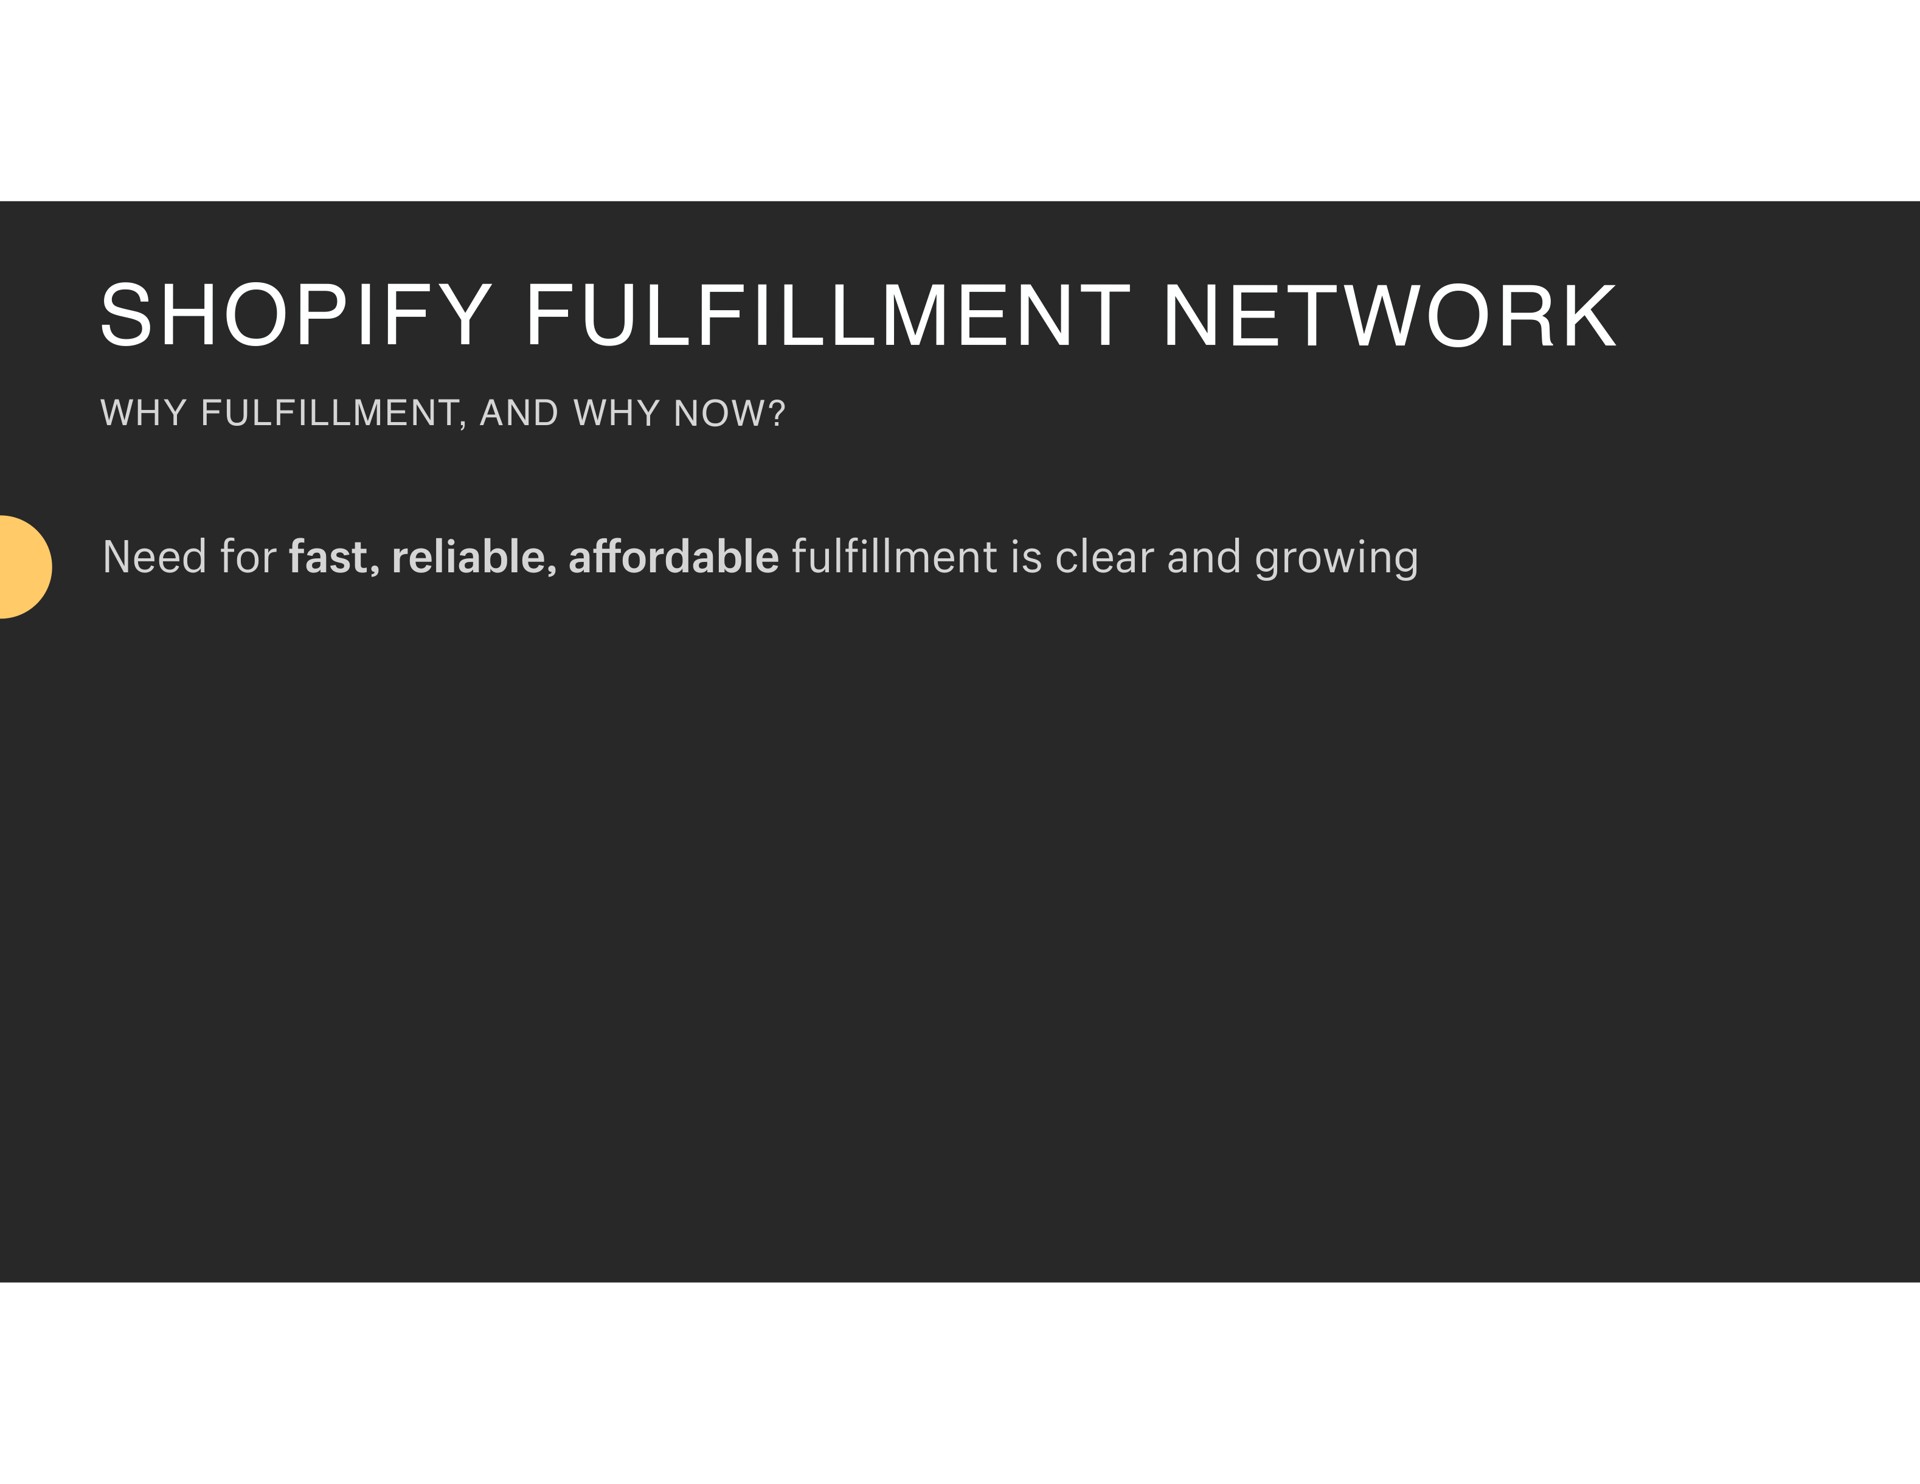 fulfillment network need for fast reliable affordable fulfillment is clear and growing | Shopify